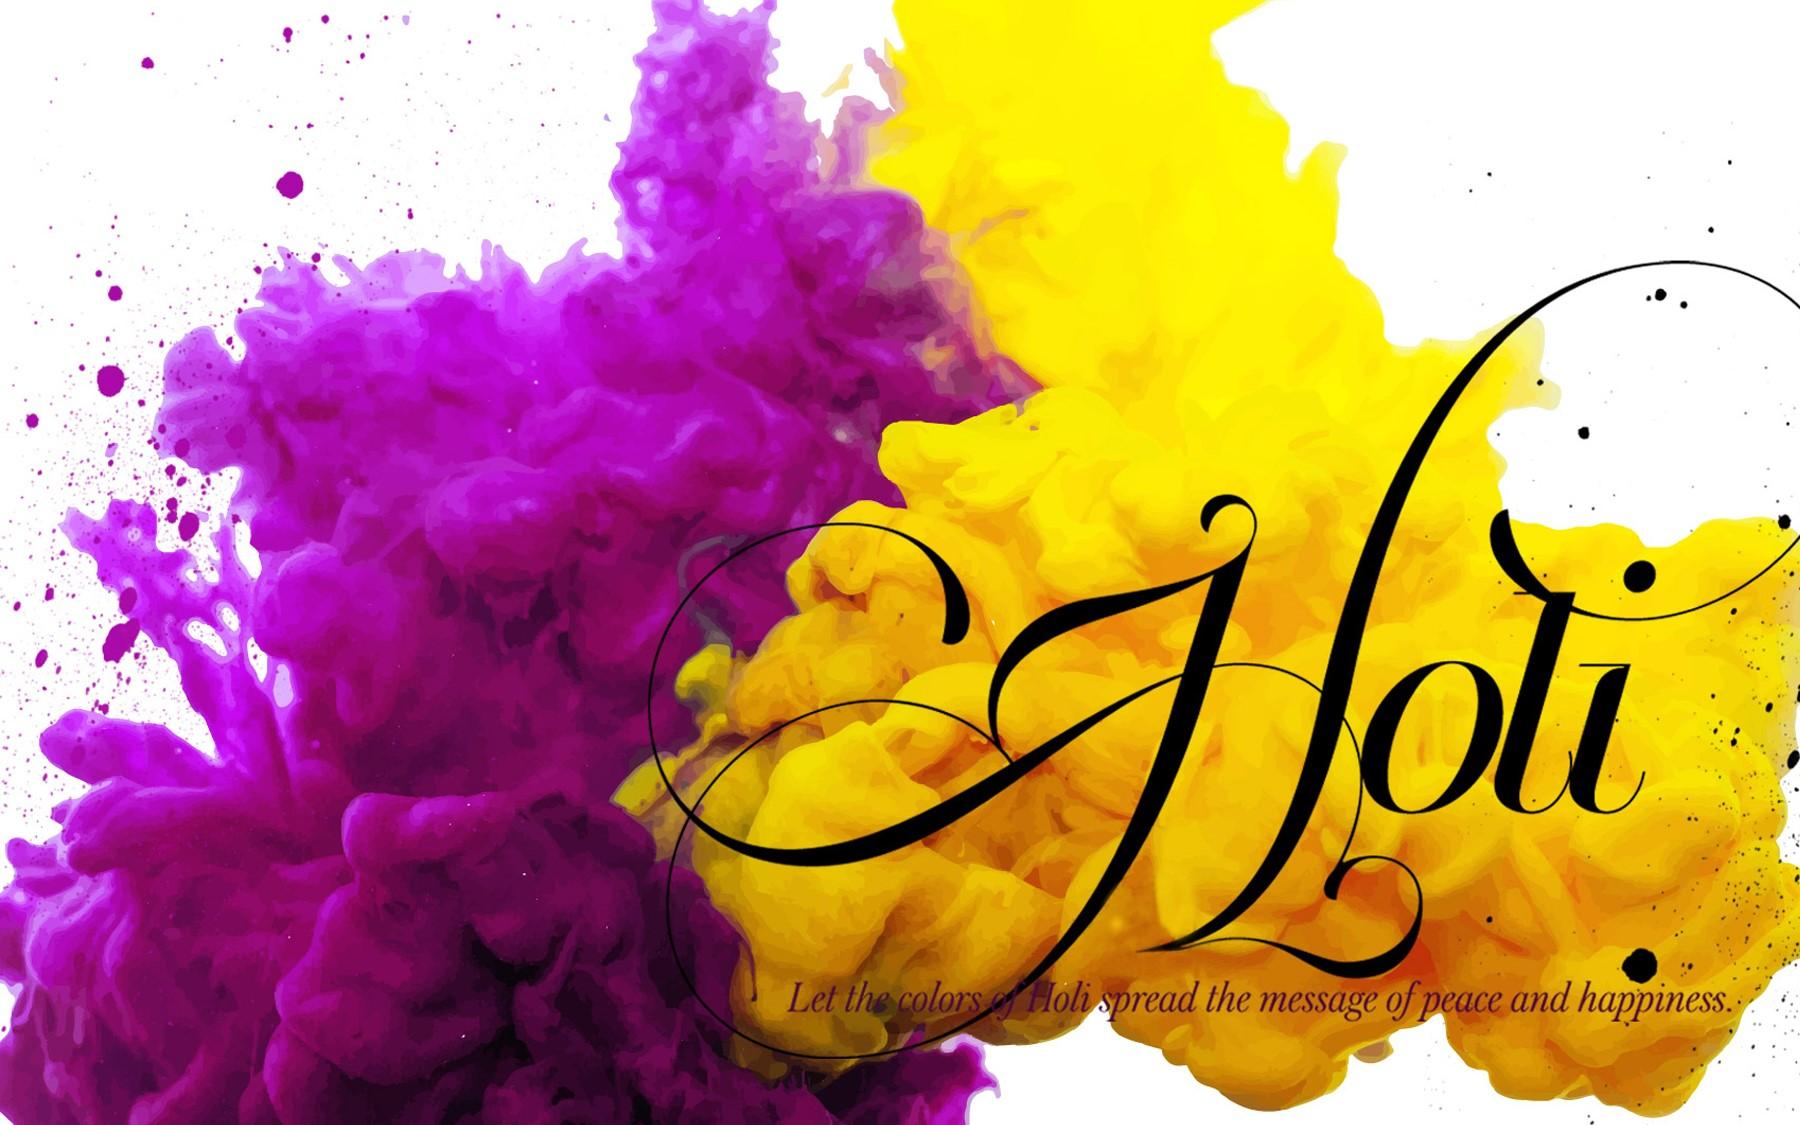 Colorful Happy Holi Image Wallpaper Picture for Whatsapp